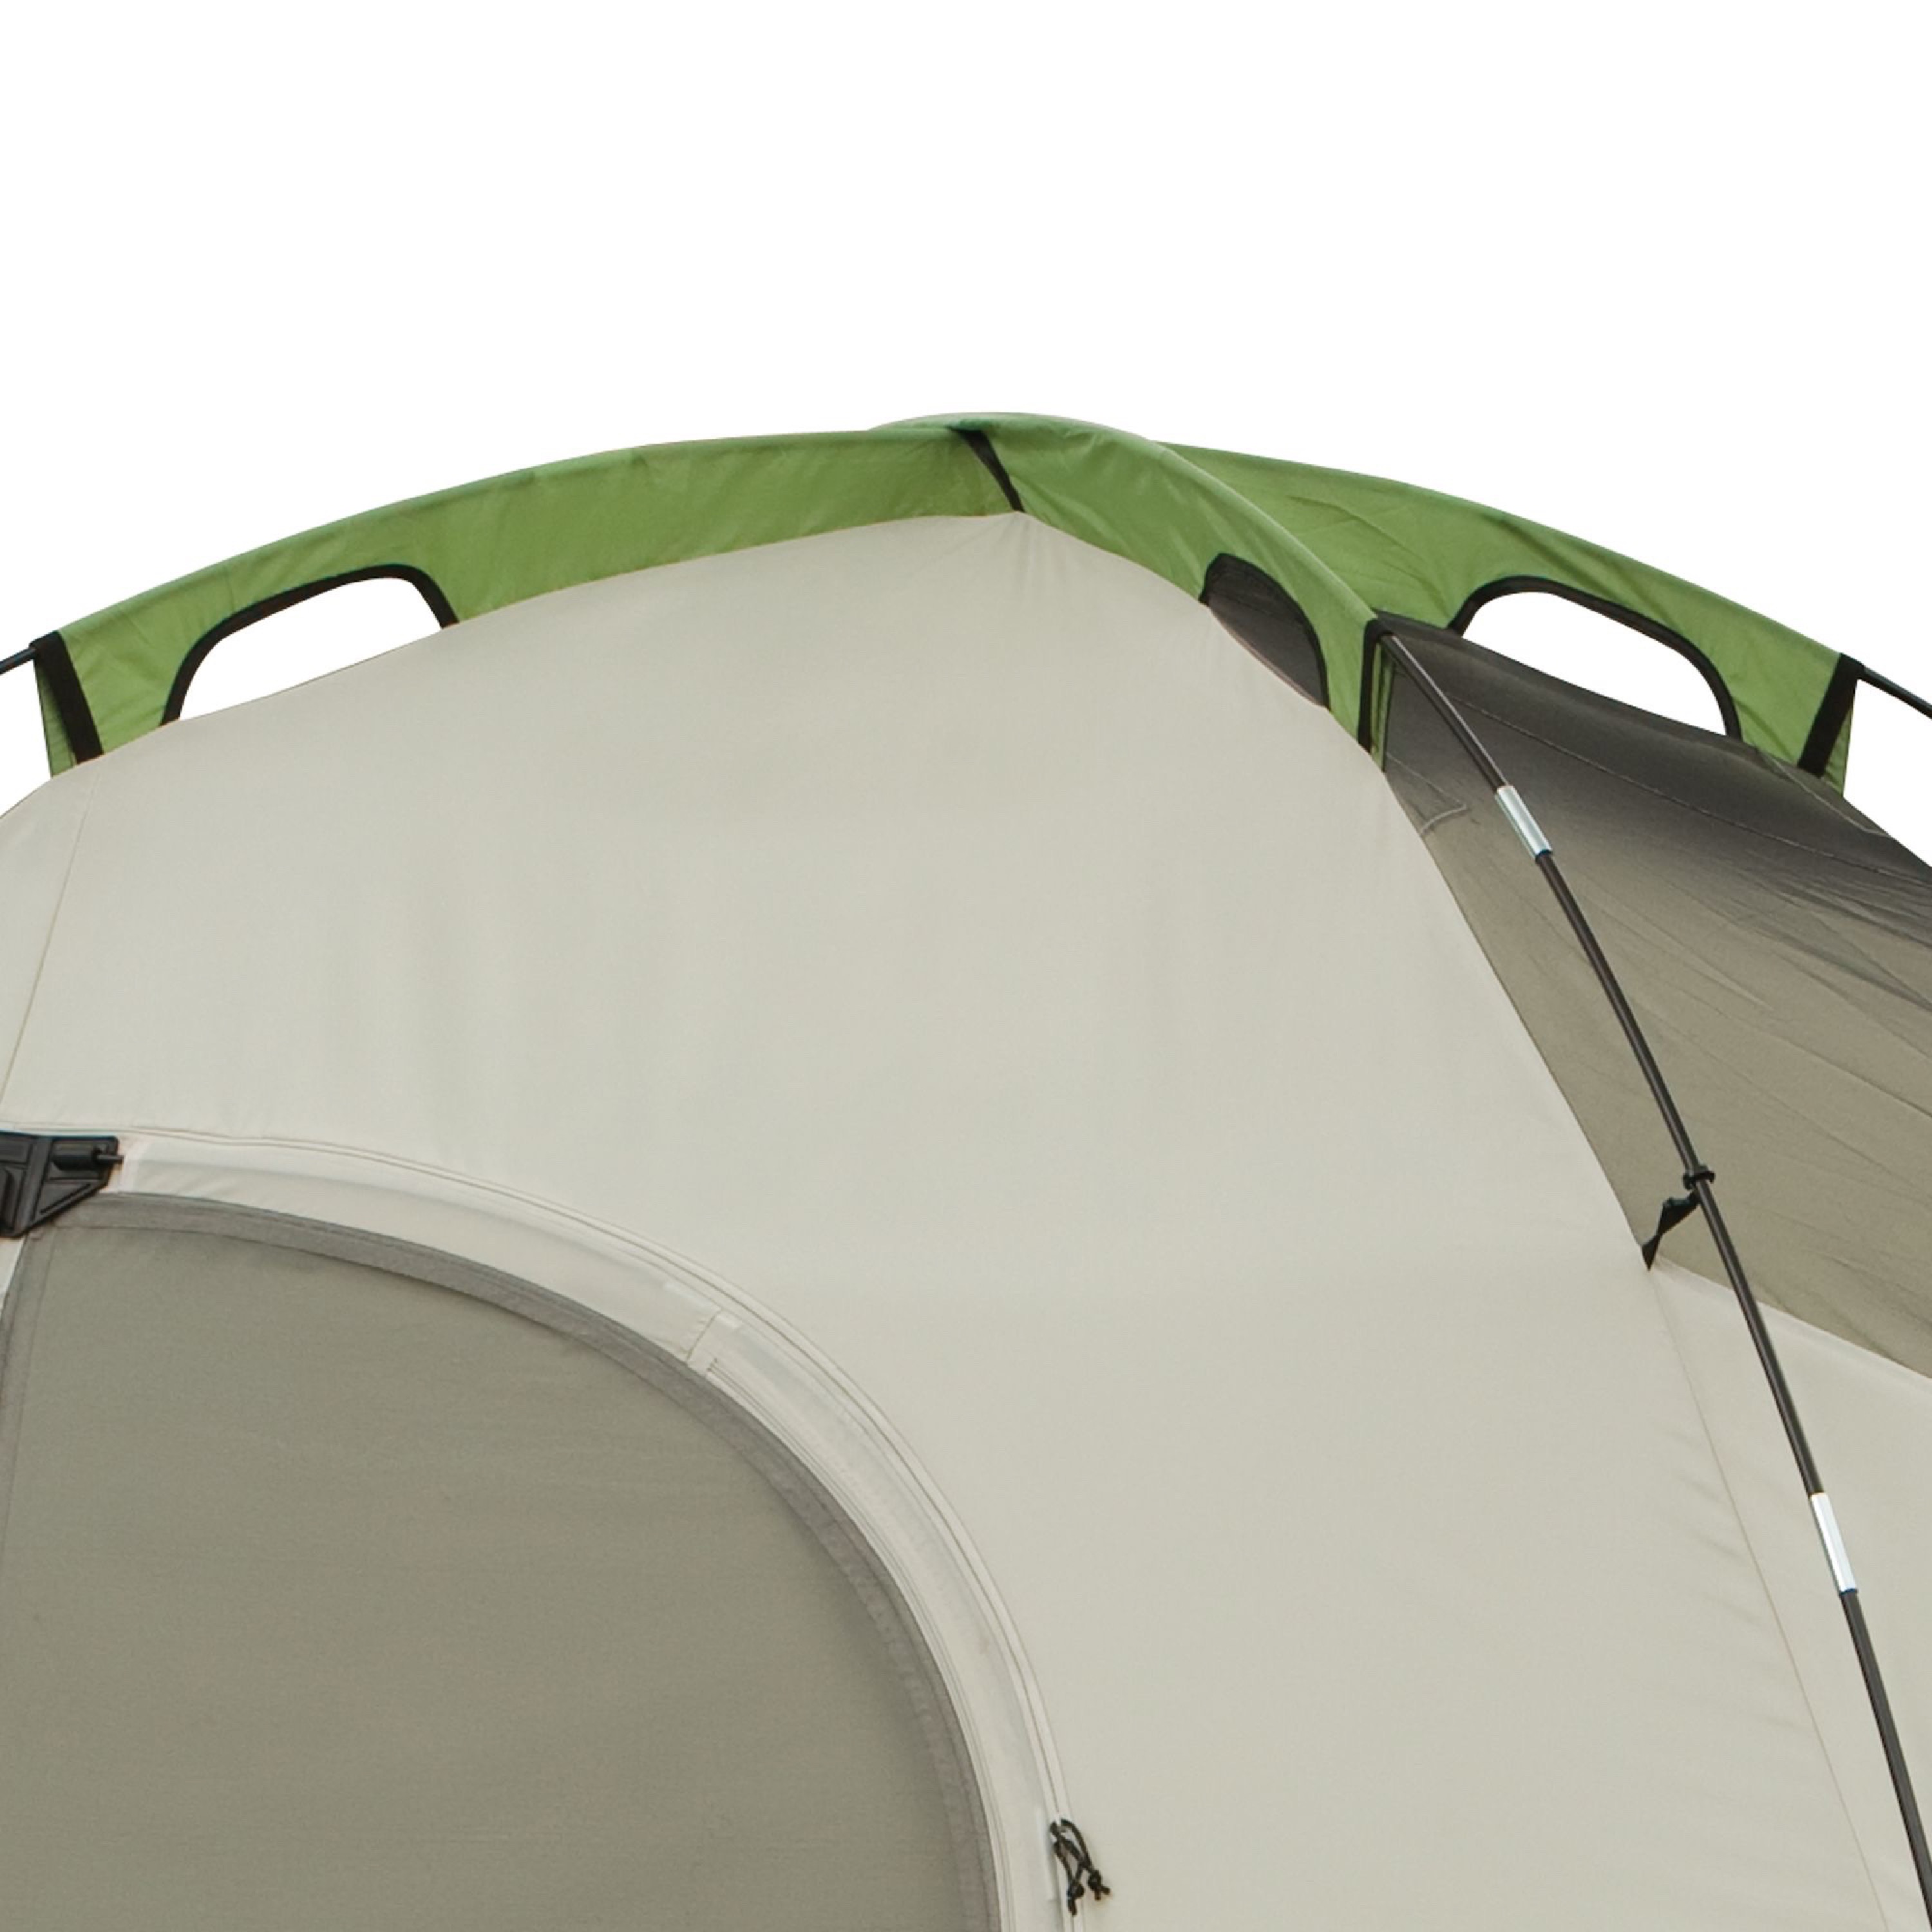 Coleman Montana 8-Person Dome Tent, 1 Room, Green - image 2 of 8